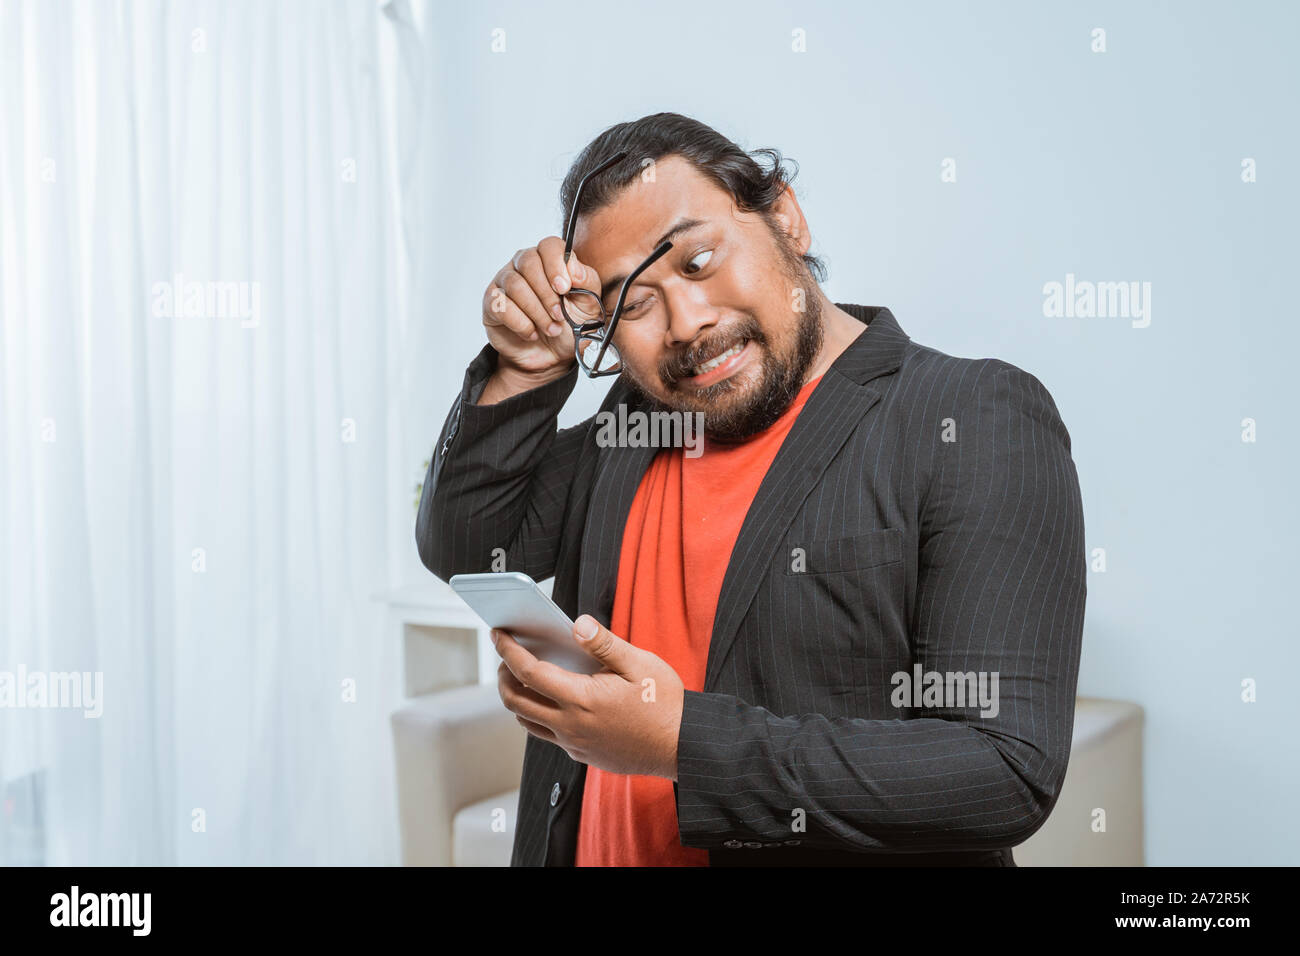 stress businessman holding his phone at the office Stock Photo